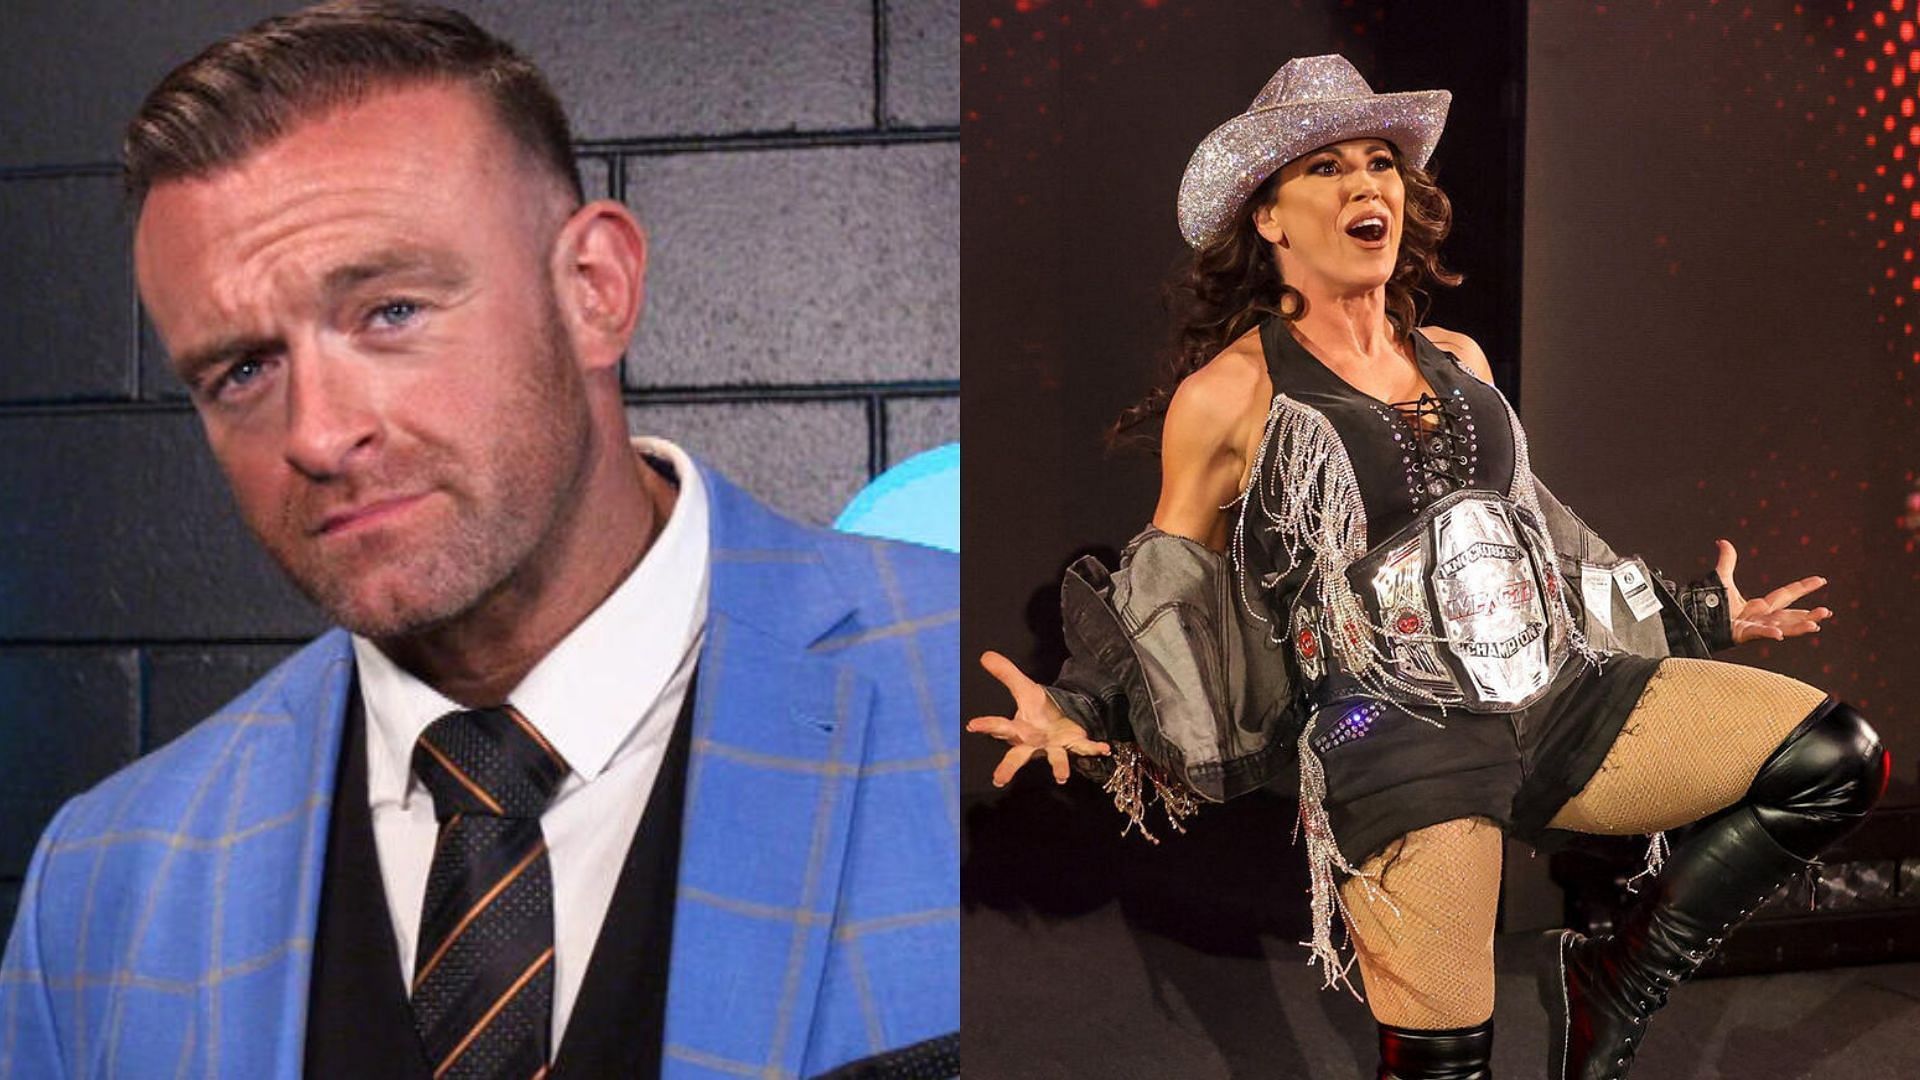 Nick Aldis and Mickie James were in attendance for the Hall of Fame ceremony